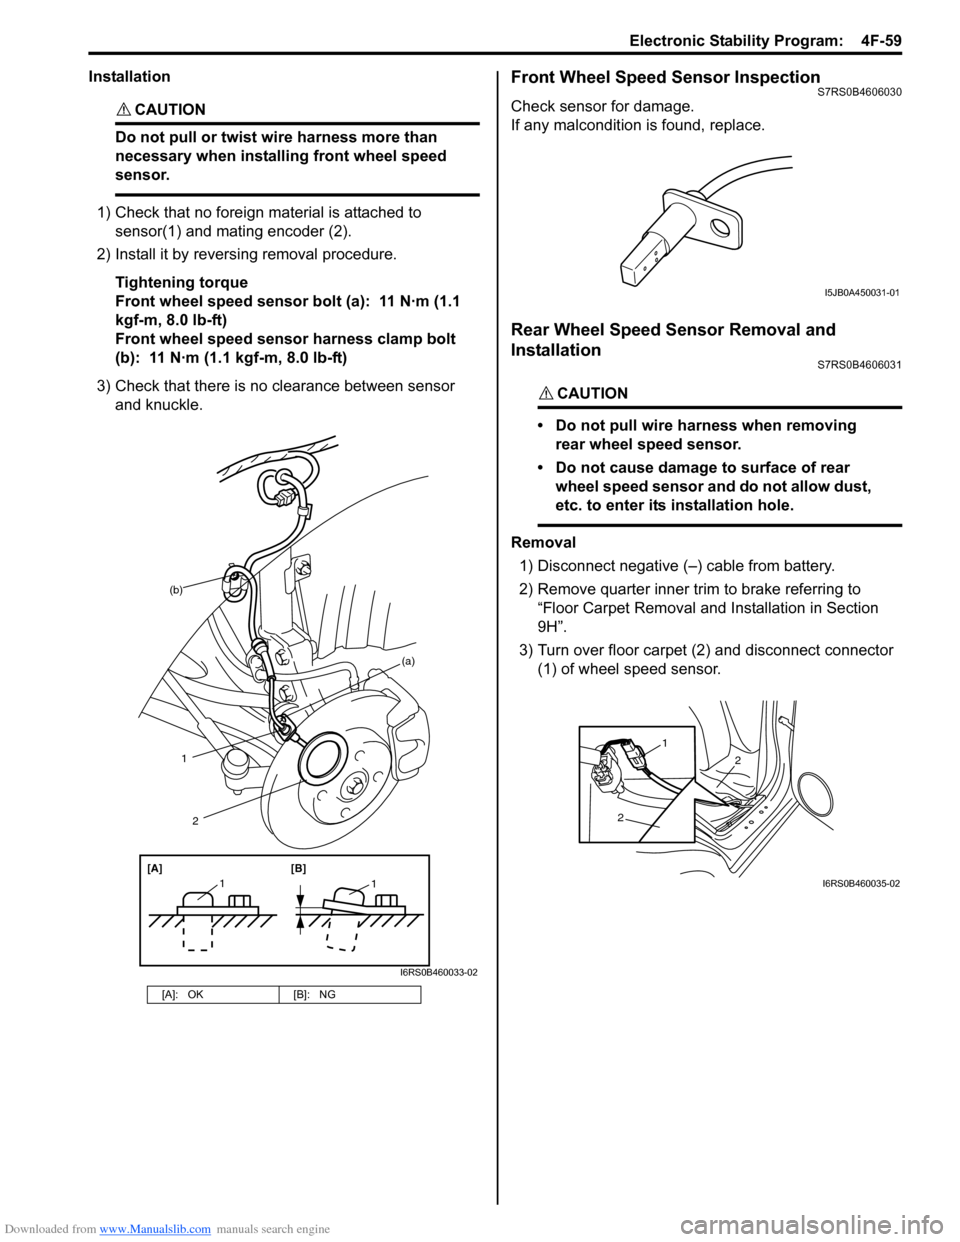 SUZUKI SWIFT 2006 2.G Service User Guide Downloaded from www.Manualslib.com manuals search engine Electronic Stability Program:  4F-59
Installation
CAUTION! 
Do not pull or twist wire harness more than 
necessary when installing front wheel 